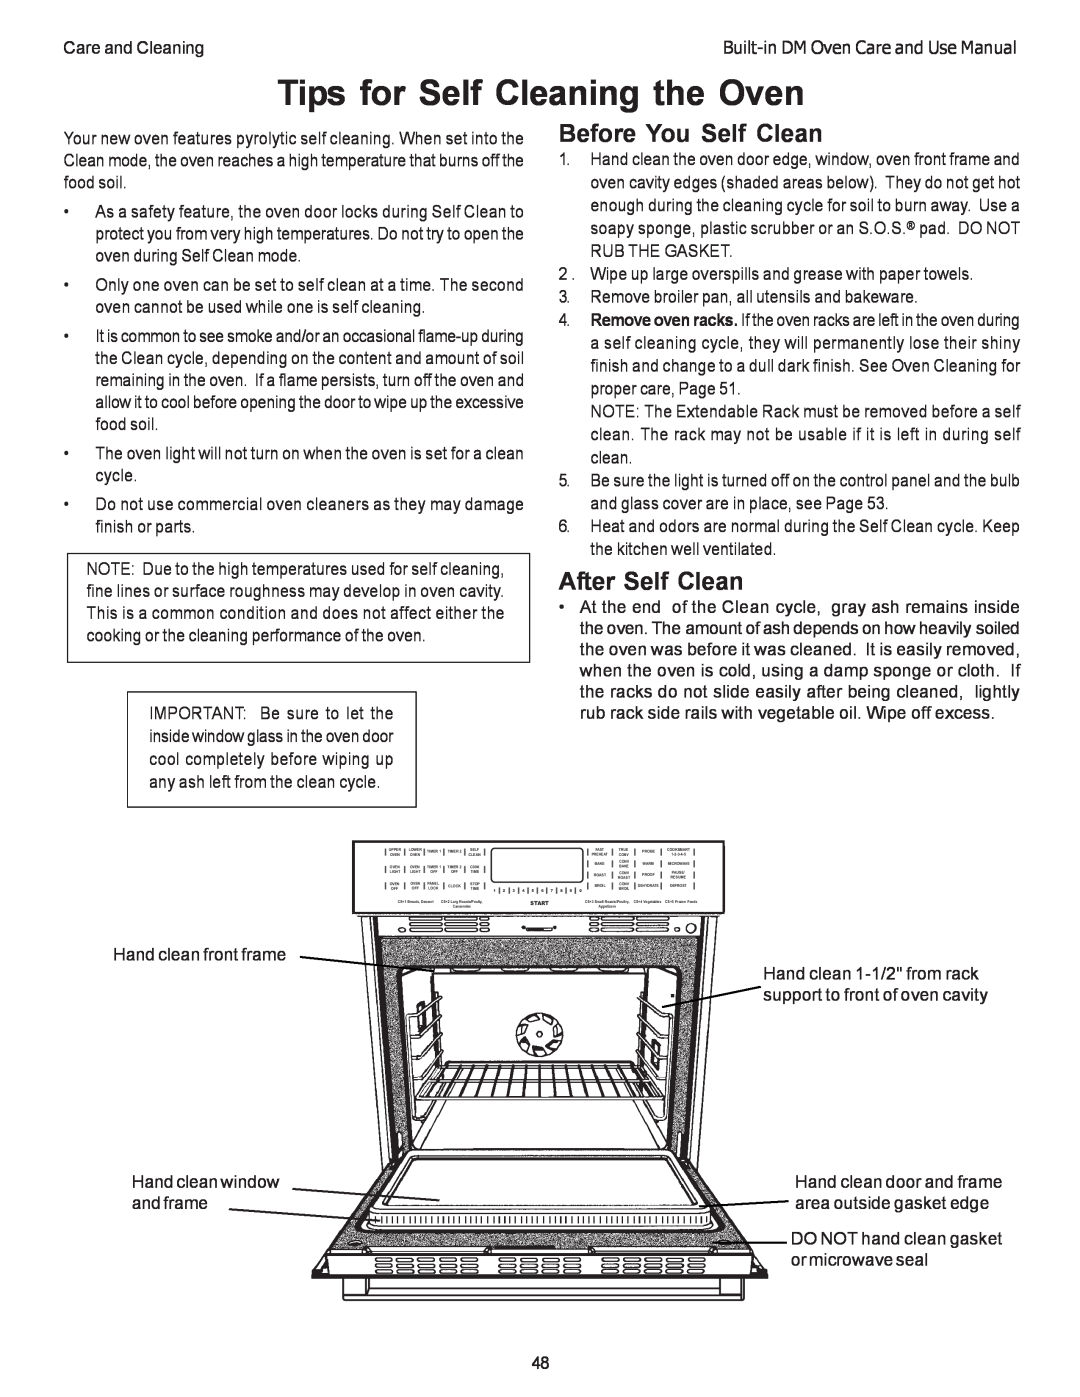 Thermador DM302, DM301 manual Tips for Self Cleaning the Oven, Before You Self Clean, After Self Clean 